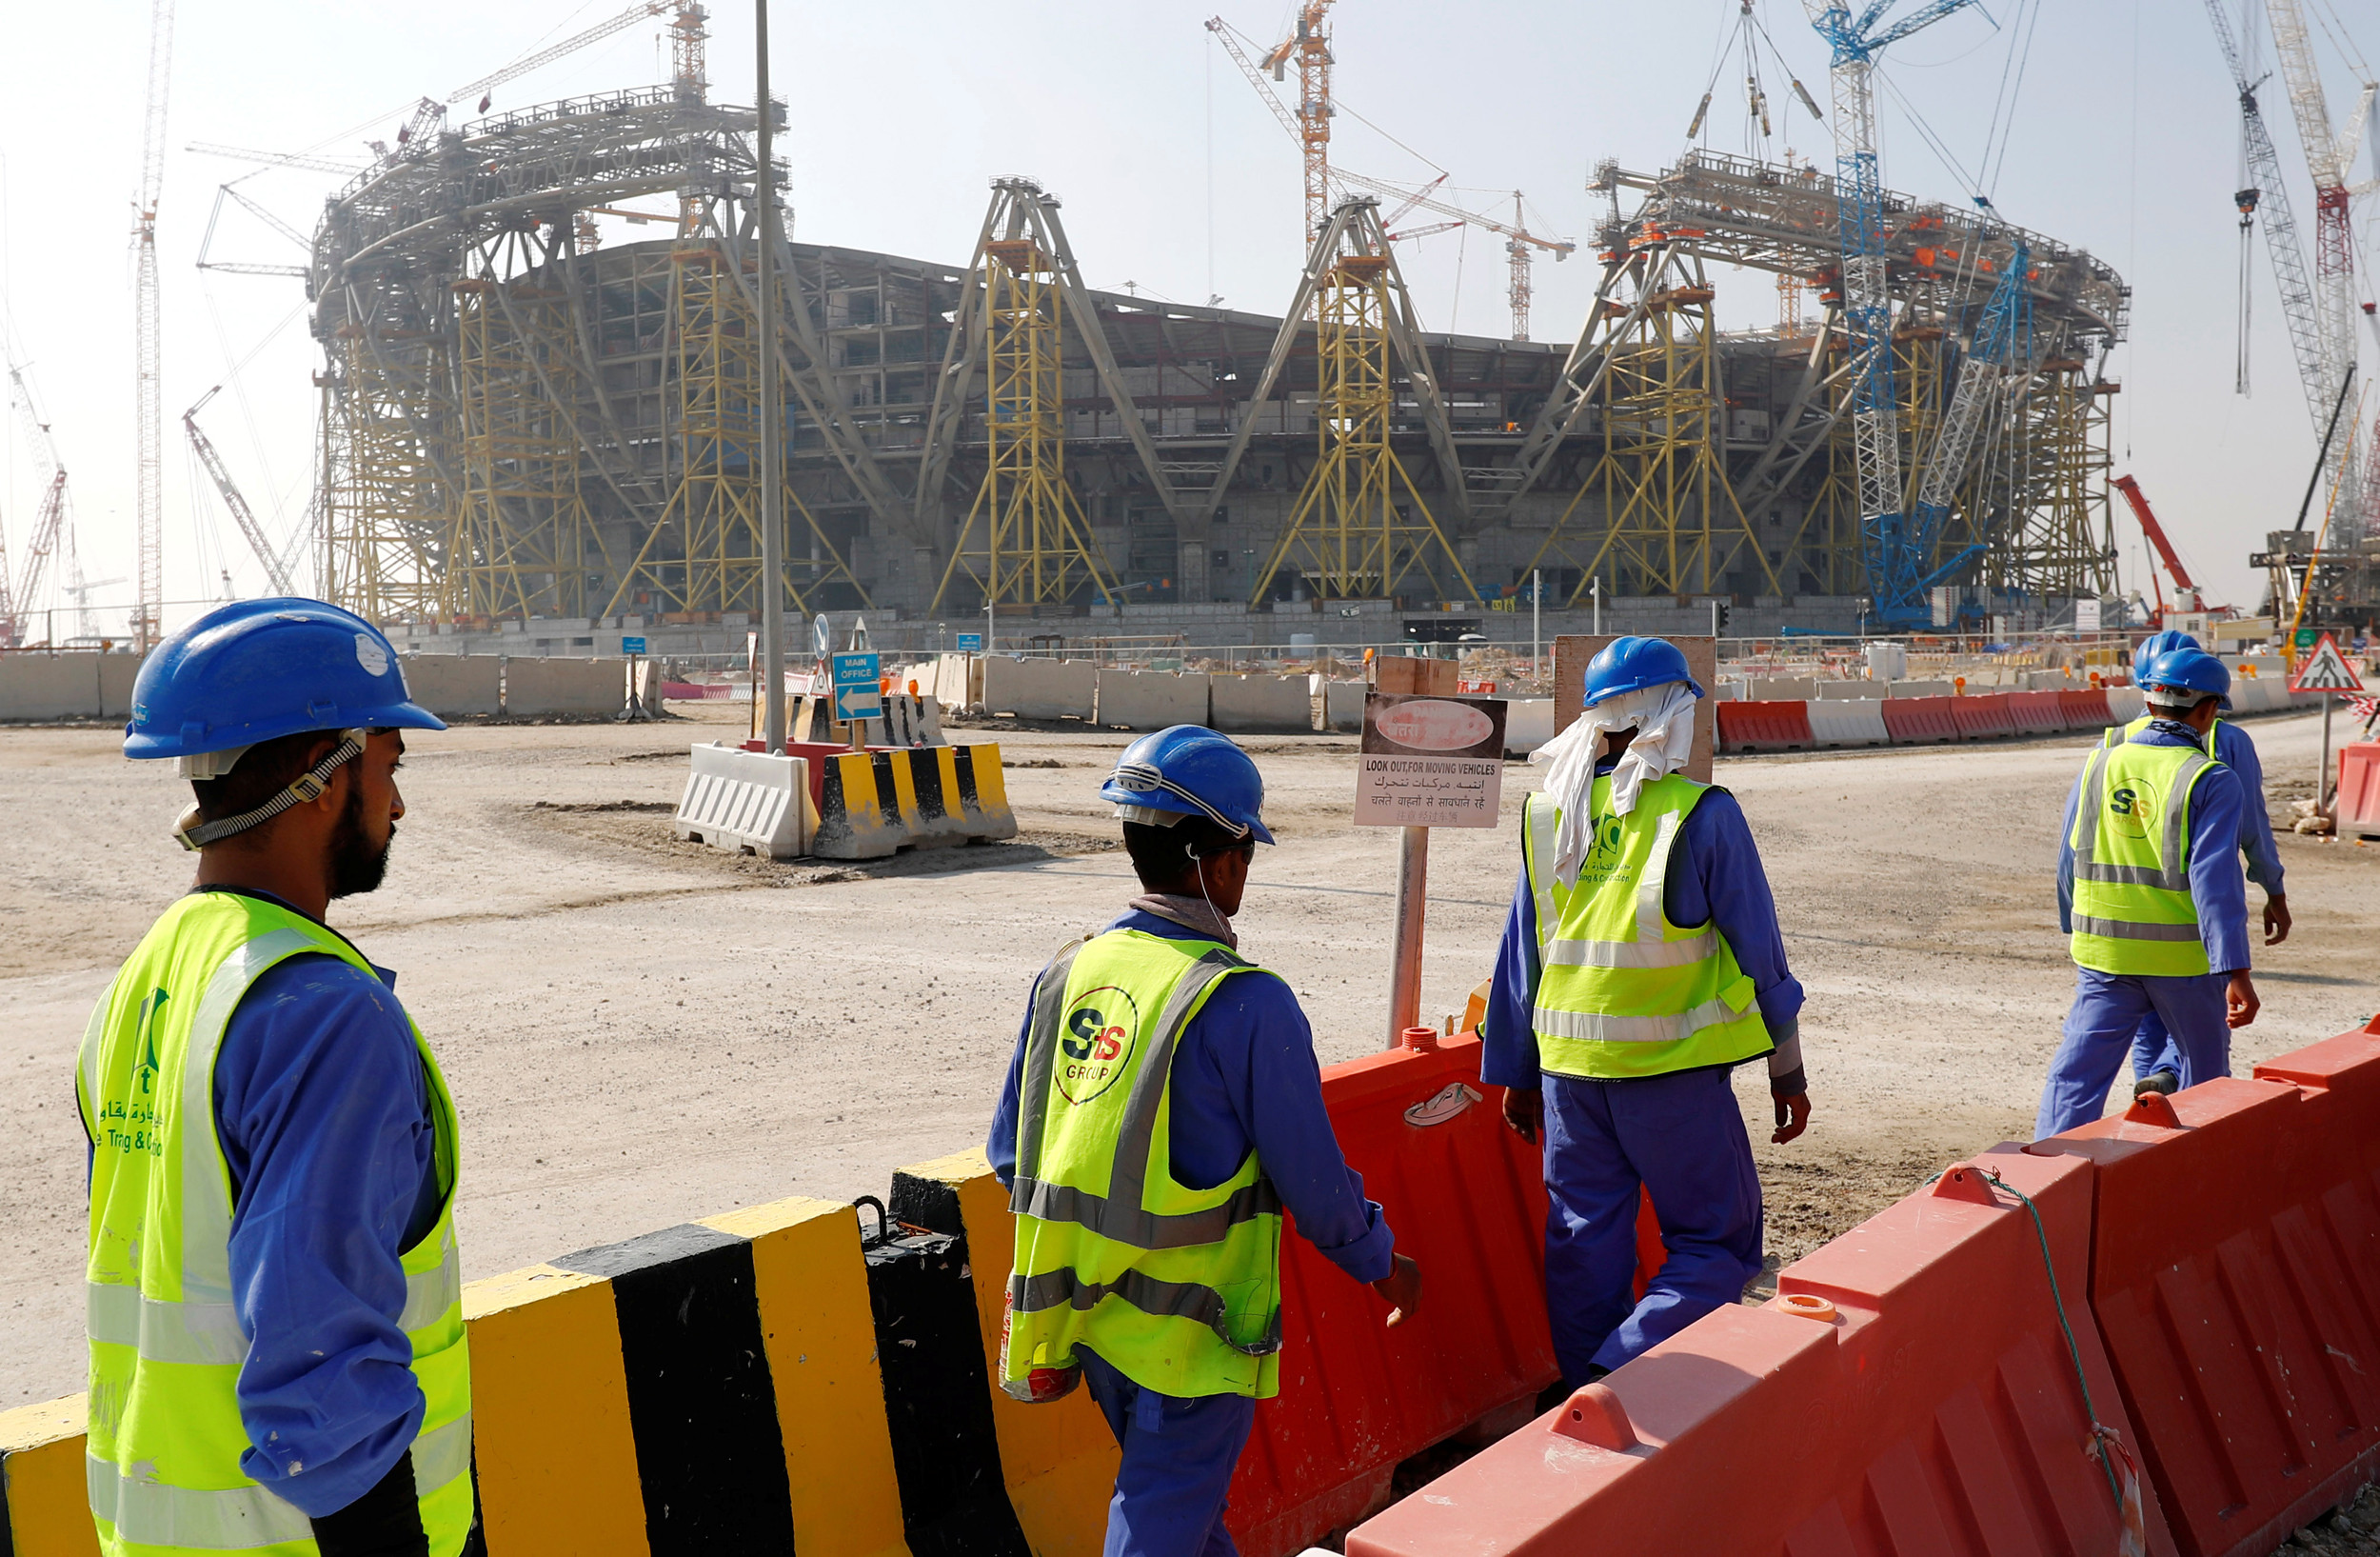 'Unpaid wages top Qatar migrant worker complaints'